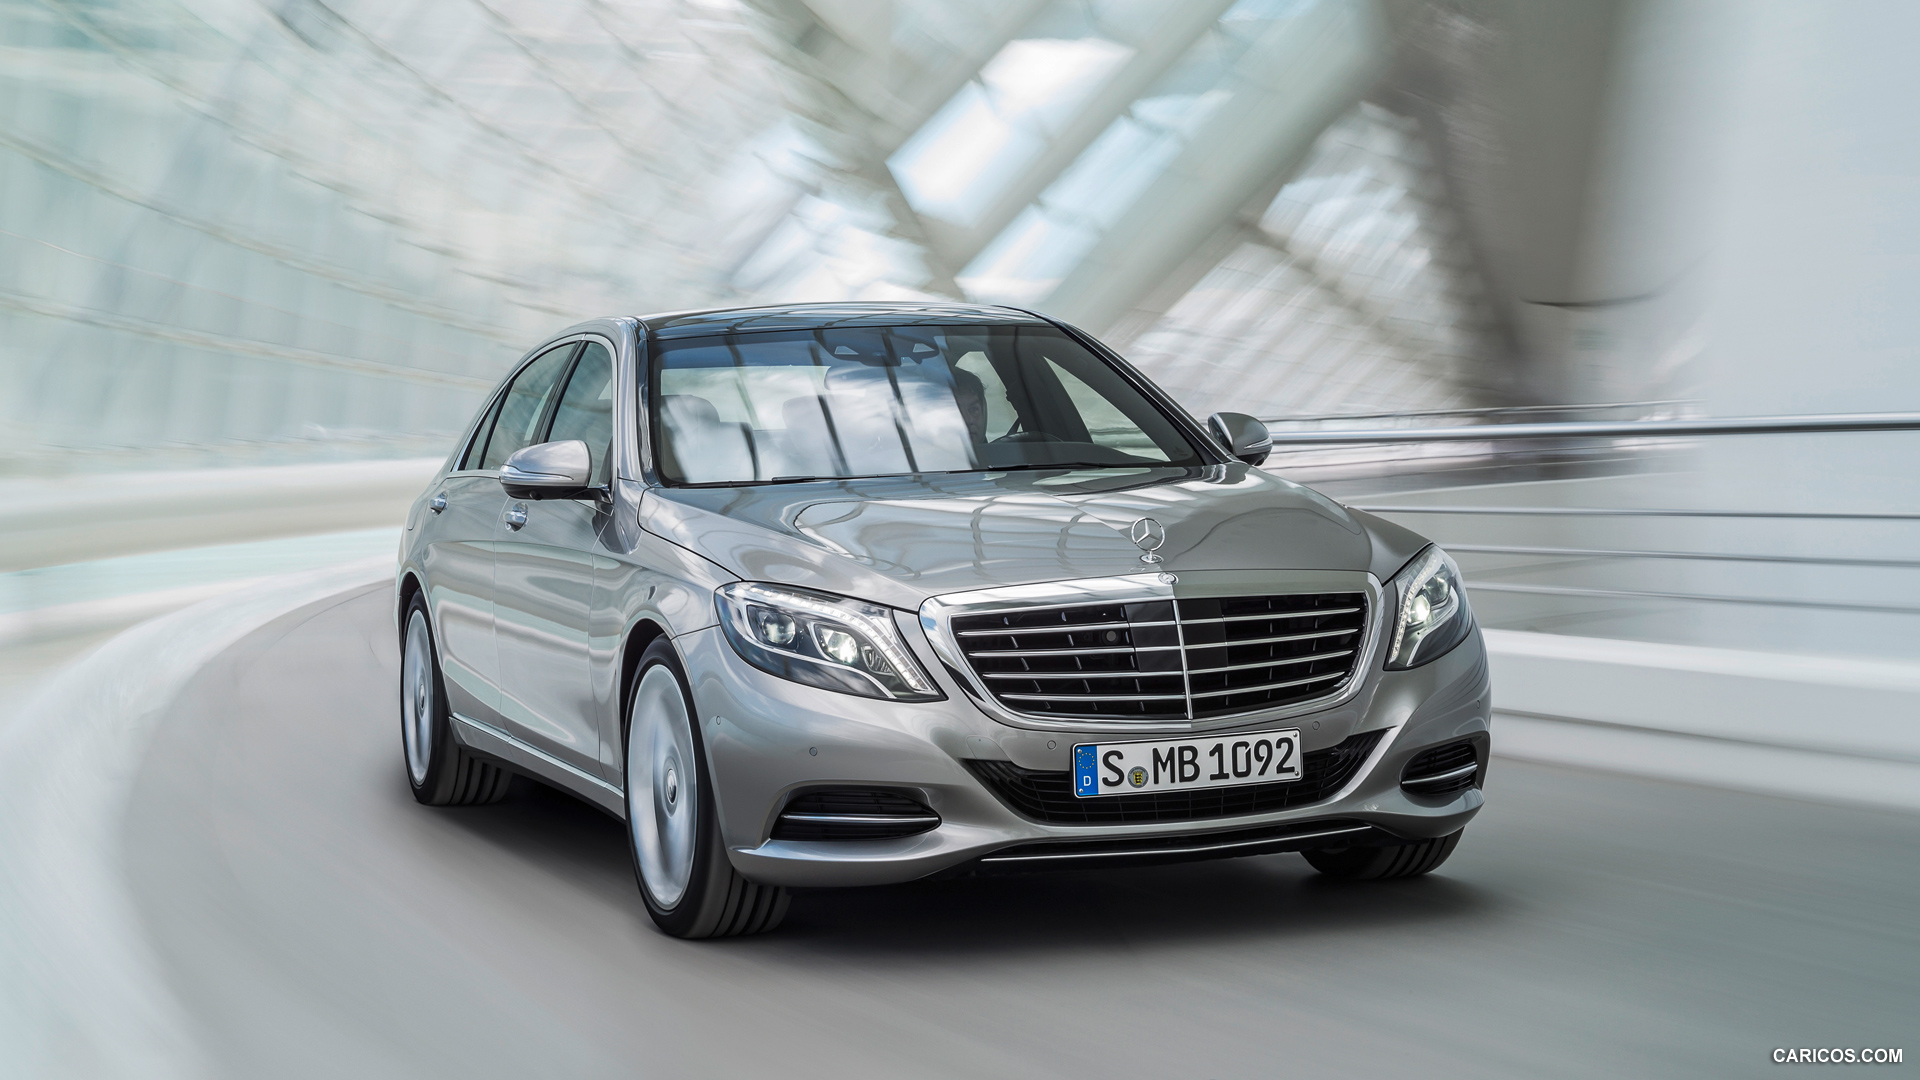 2014 Mercedes-Benz S-Class S400 HYBRID - Front, #1 of 138